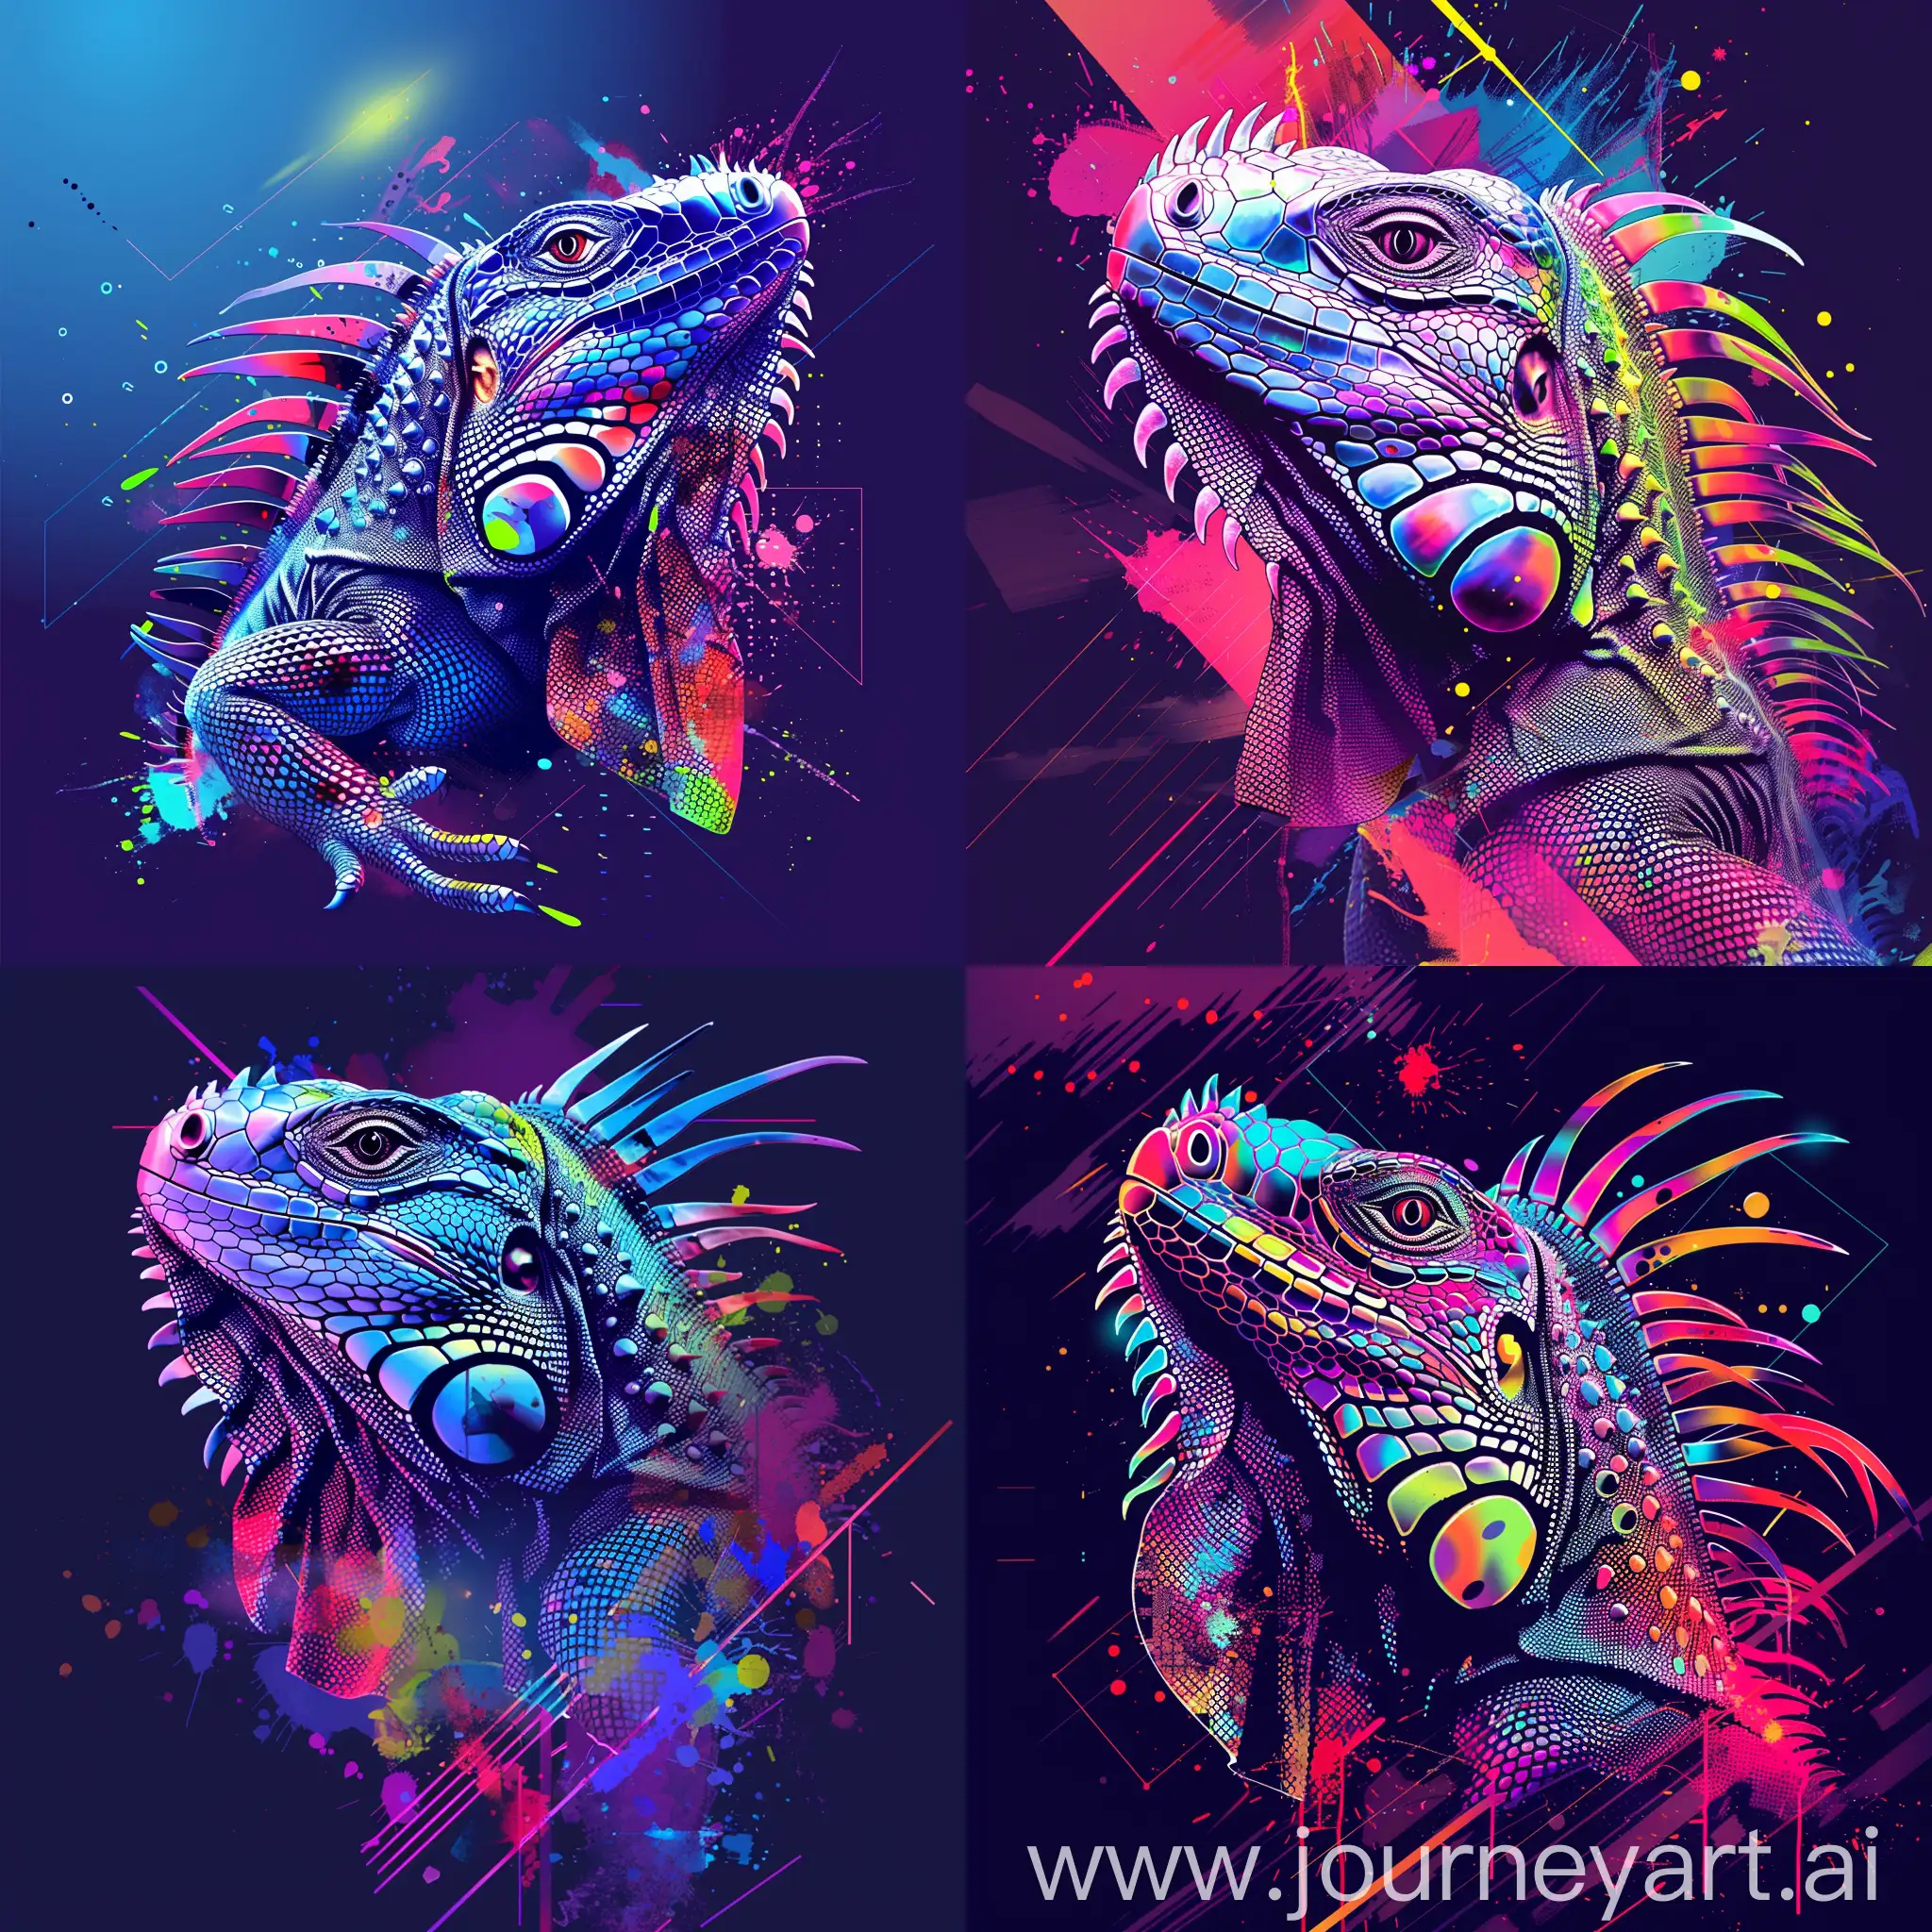 Abstract-Neon-Iguana-Head-Art-with-Geometric-Shapes-and-Paint-Splashes